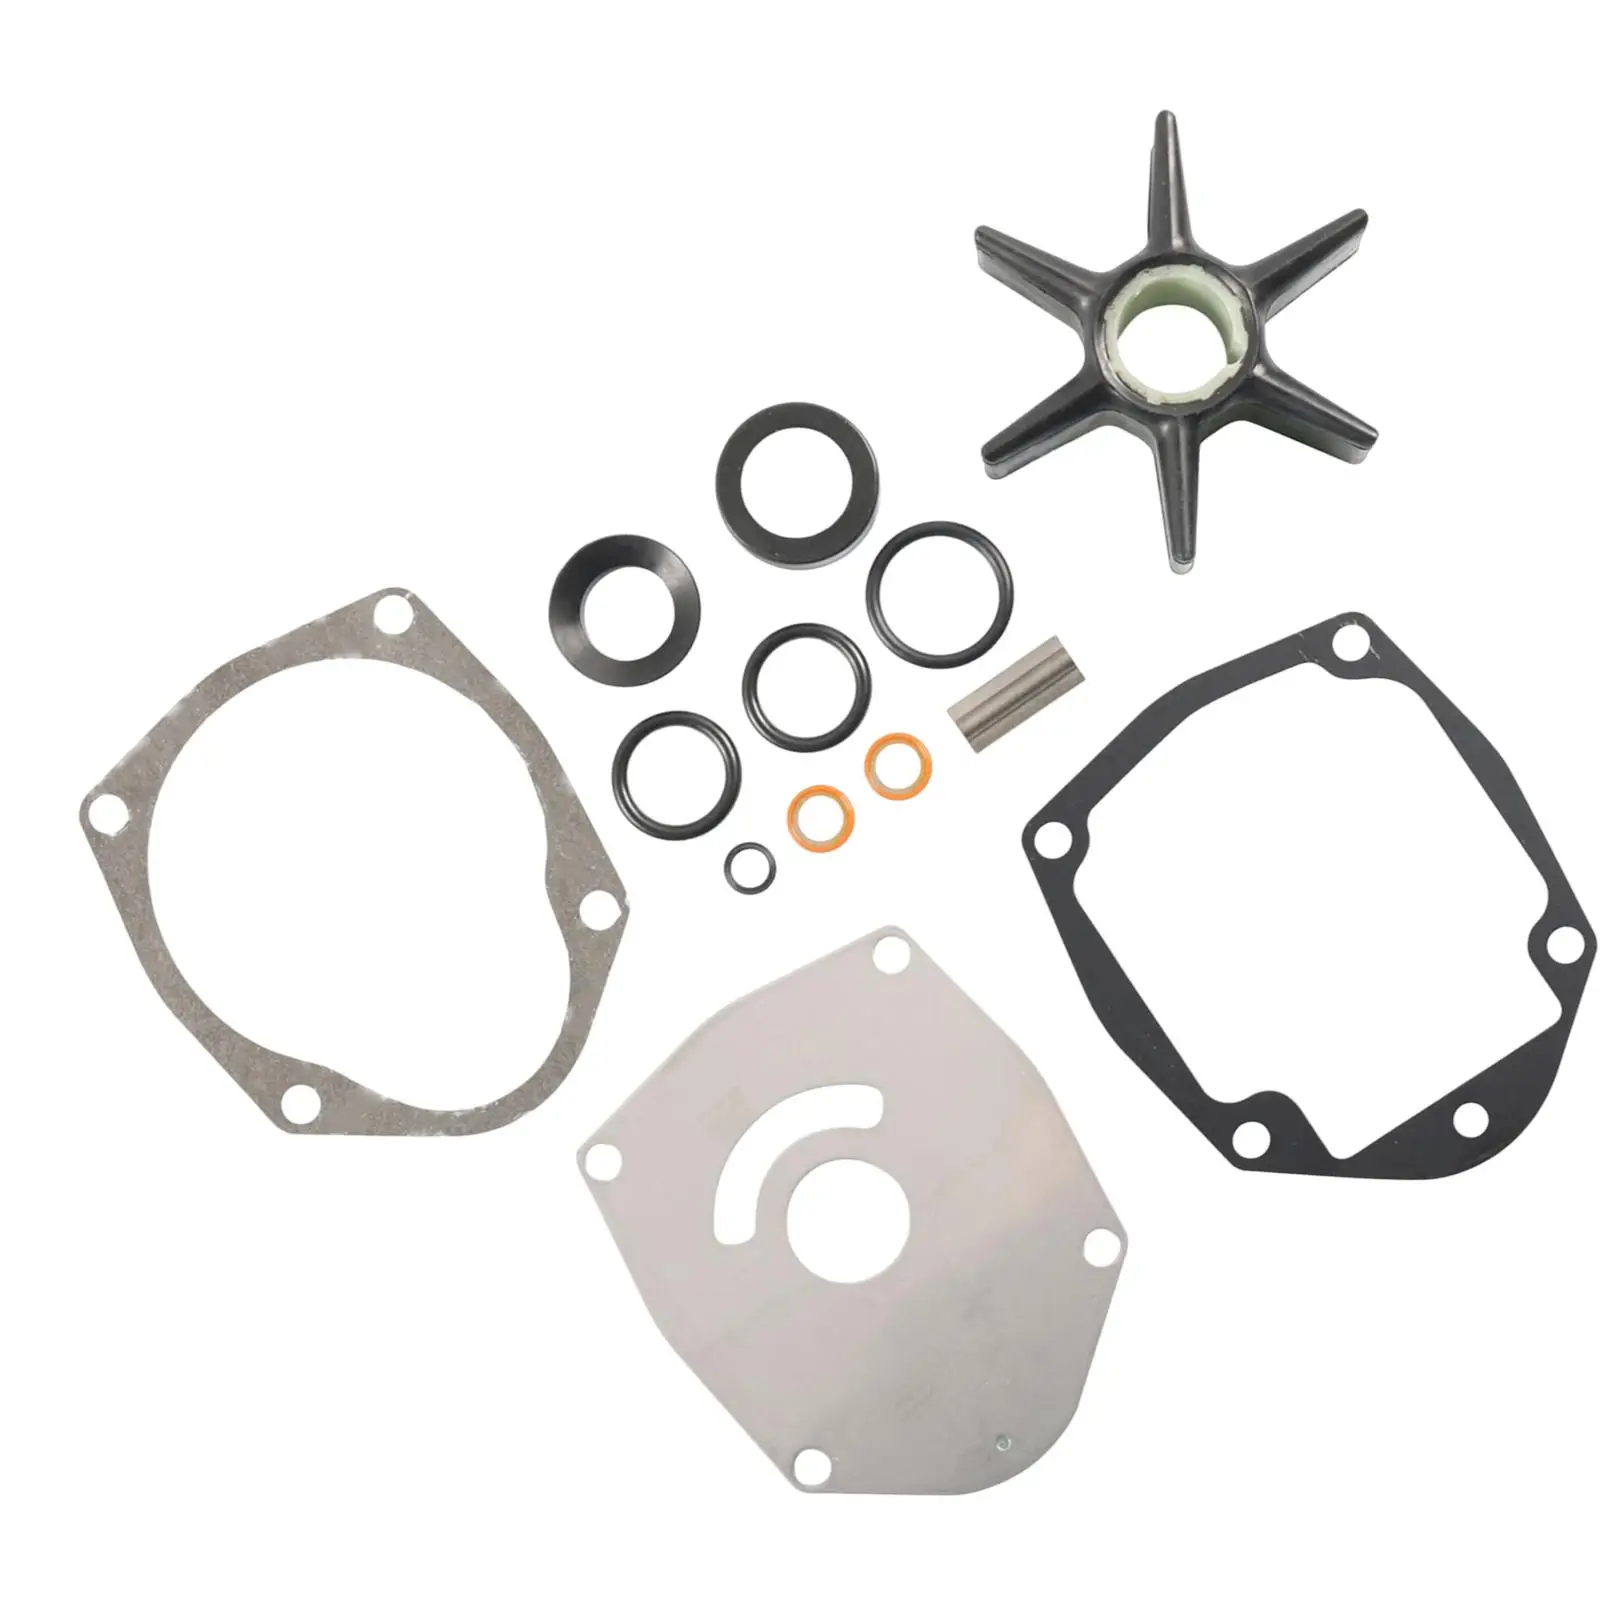 15Pcs Water Pump Impeller Kit 8M0100526 Fit for  Replacement